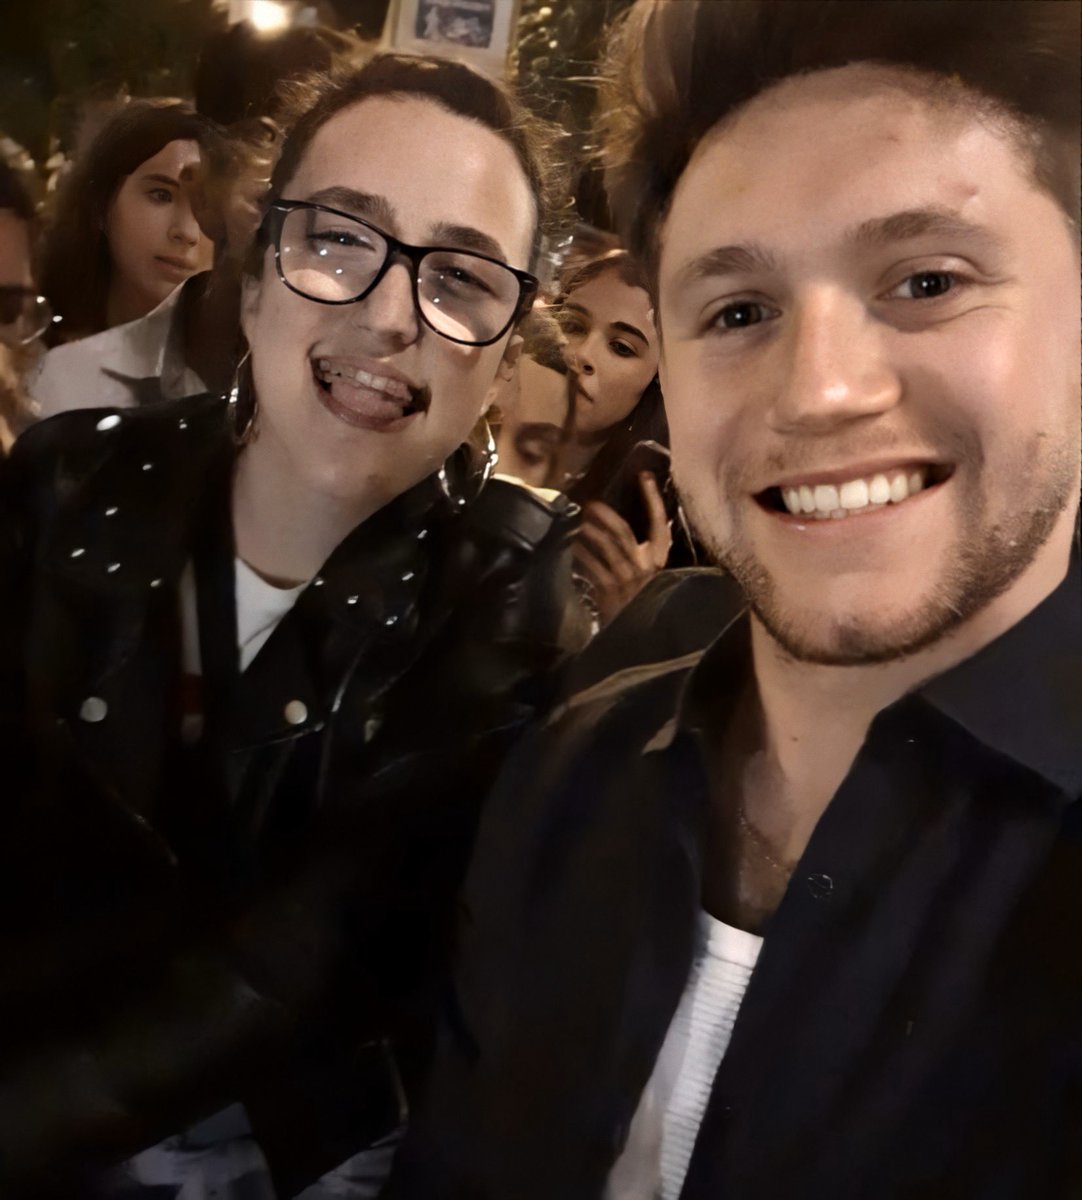 My experience meeting Niall; a little thread (I don’t want to be annoying)